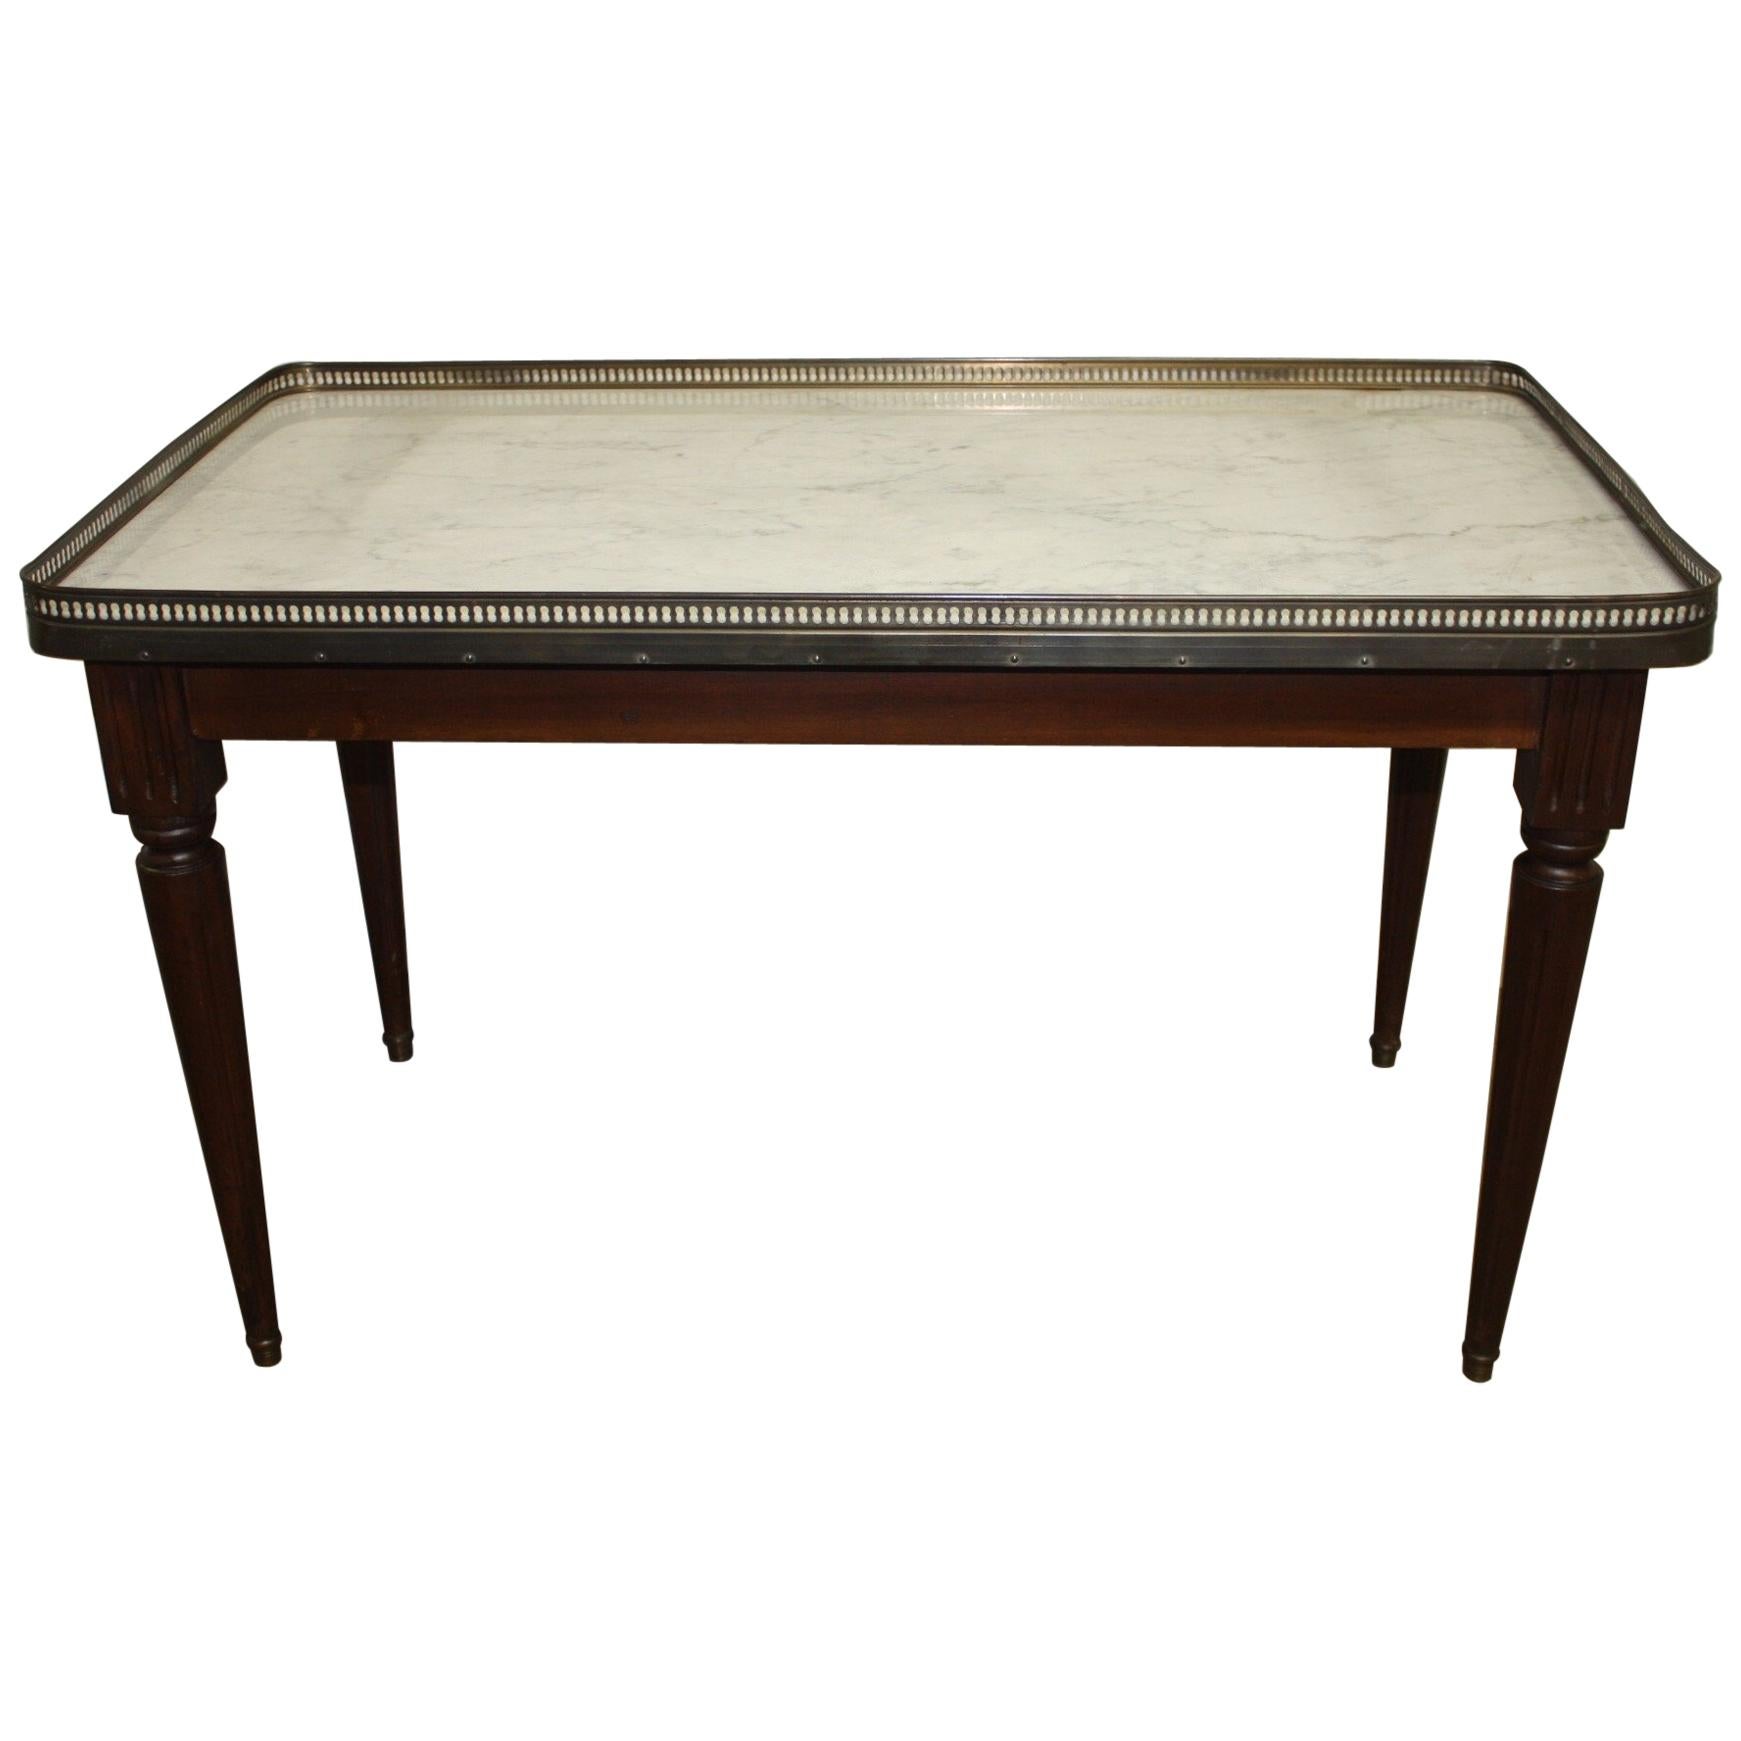 Charming French Louis XVI Style Table